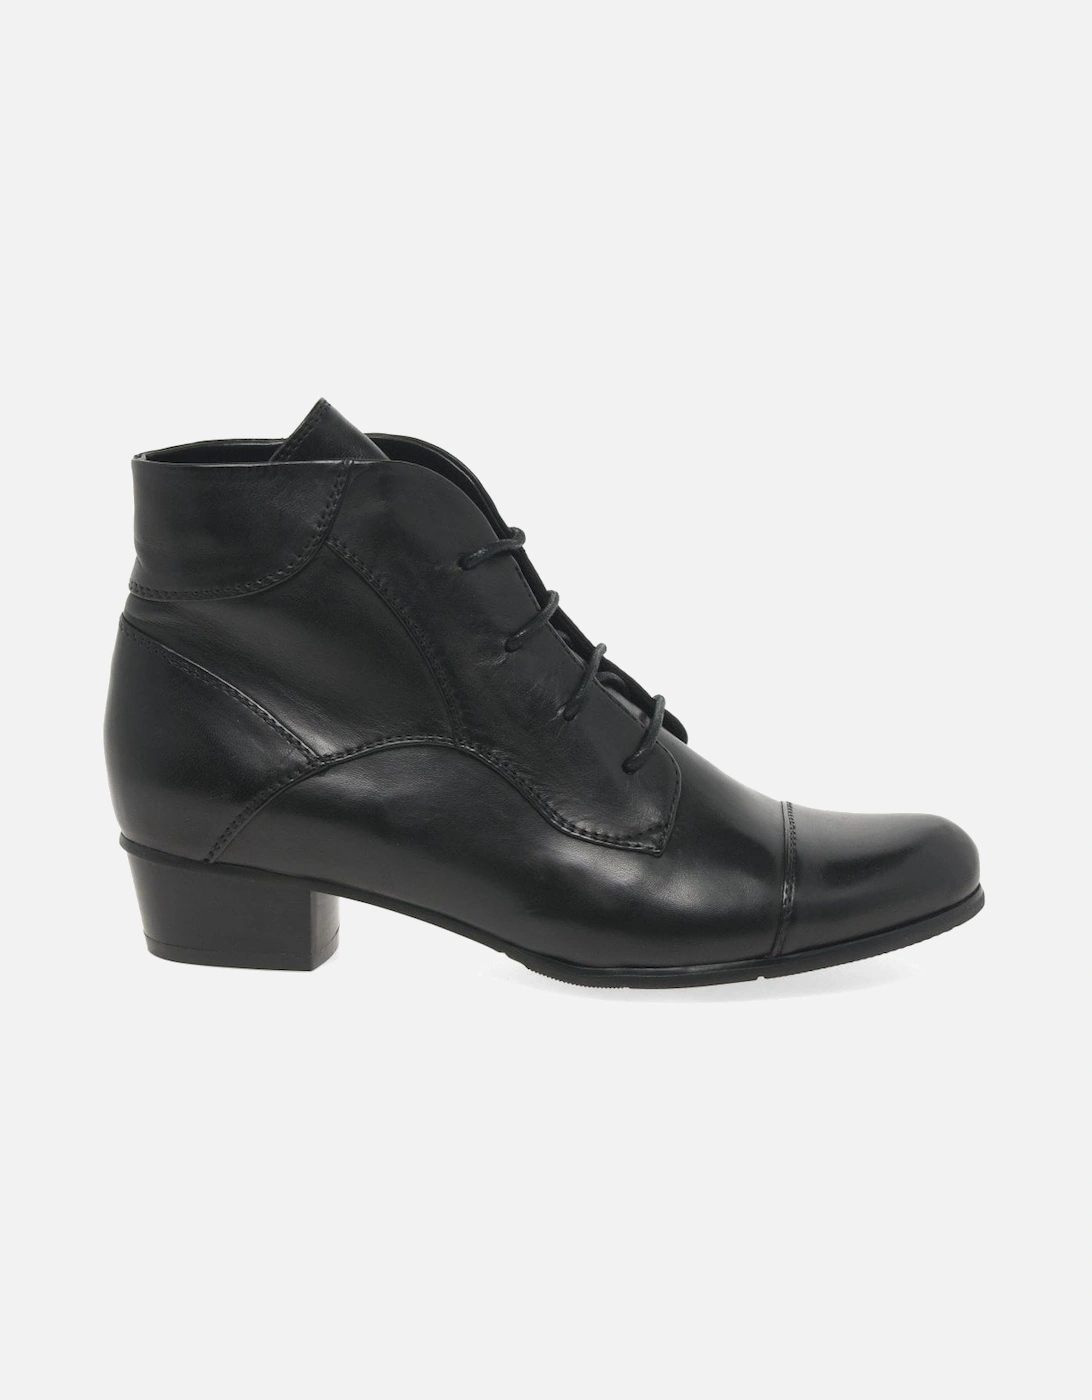 Stefany 123 Womens Victorian Ankle Boots